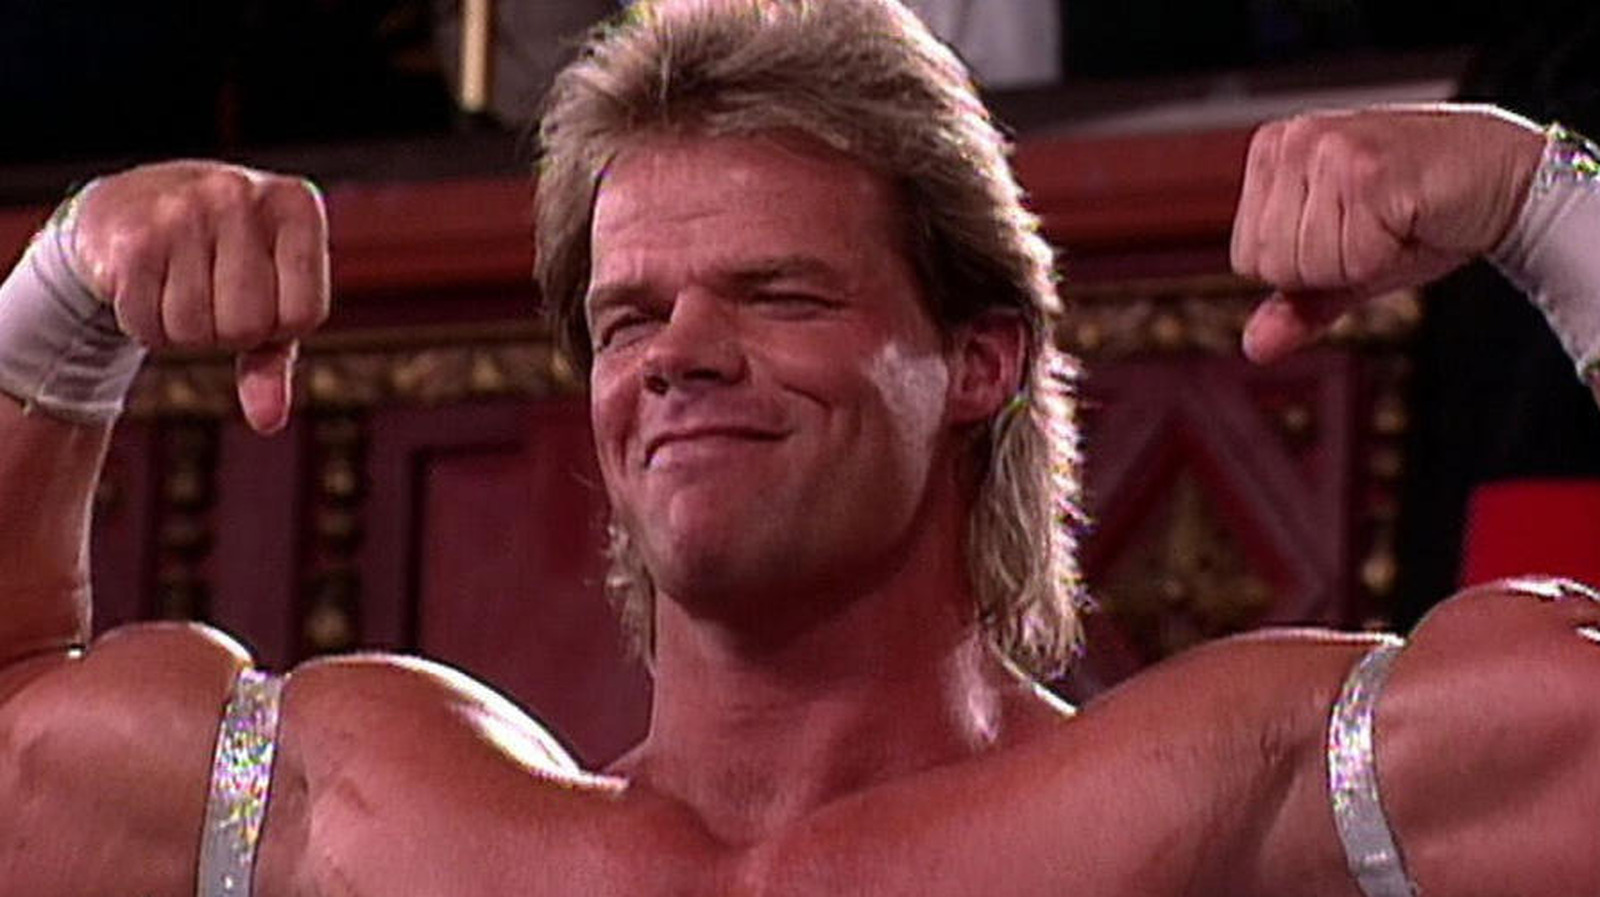 Former WWE Star Lex Luger Details His Fondness For These 2 Gimmicks